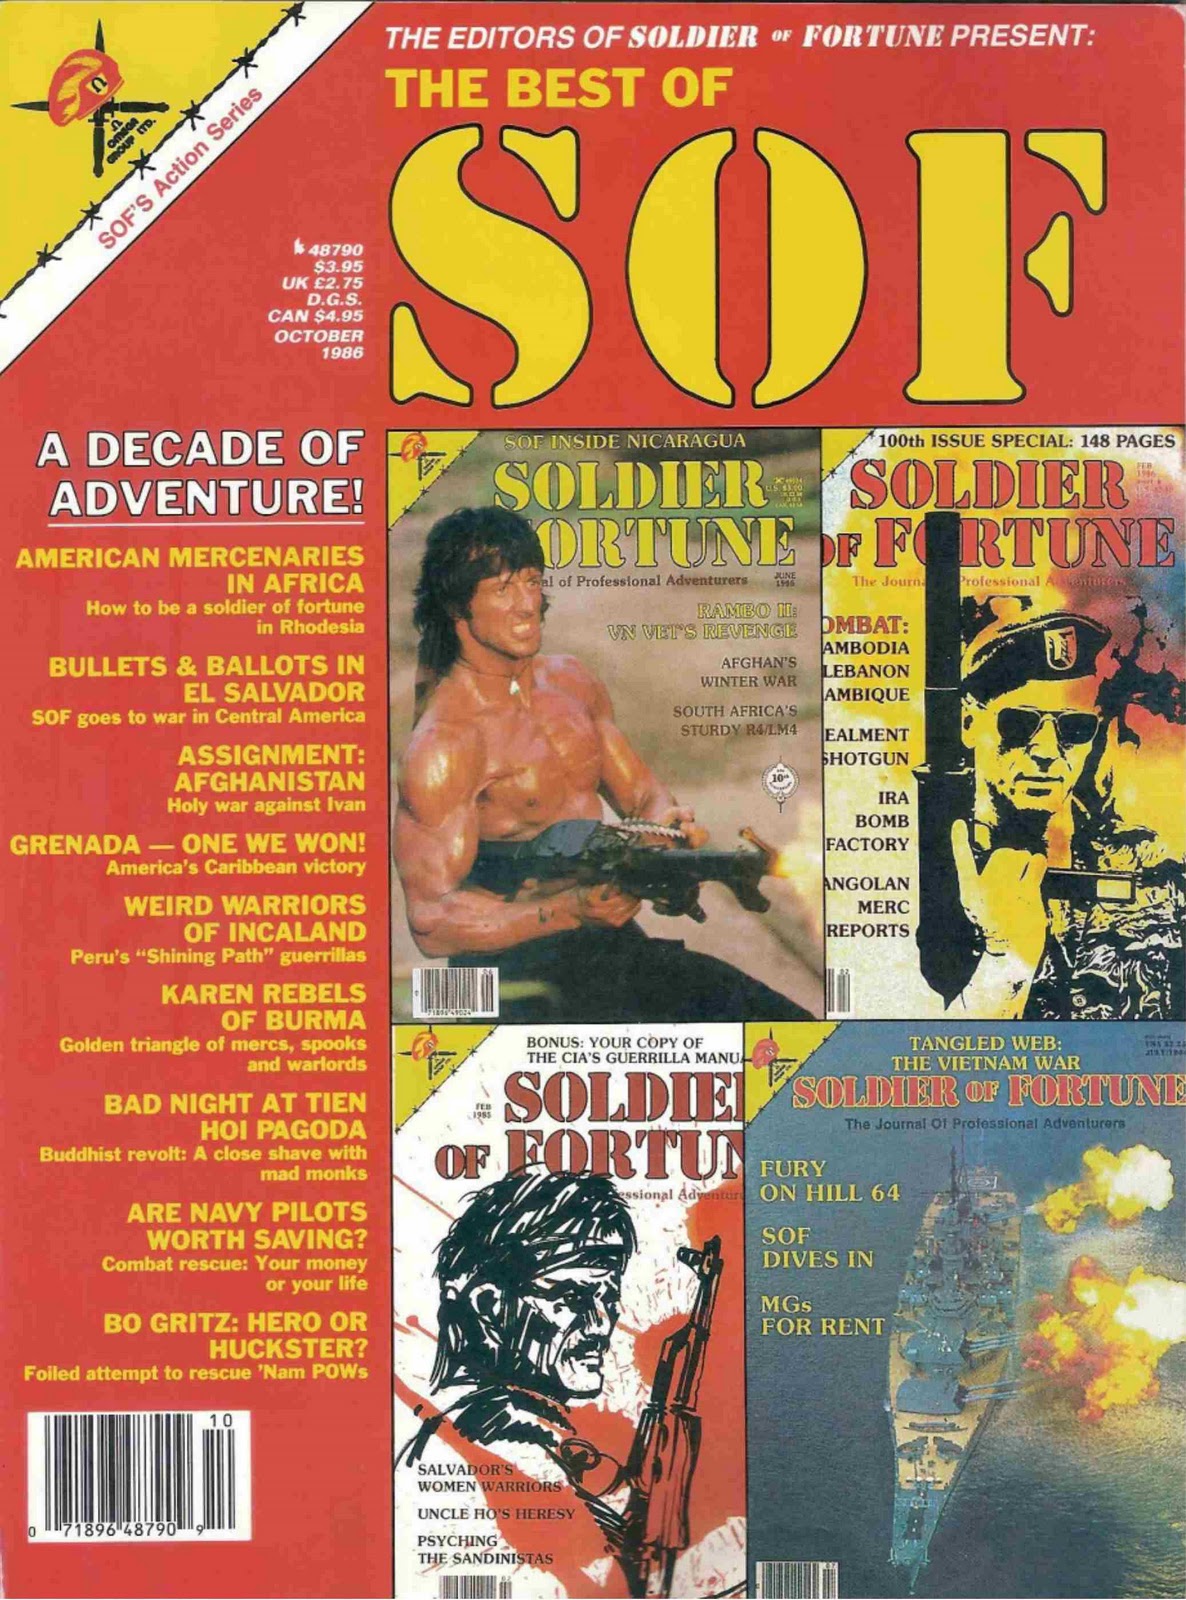 soldier of fortune magazine covers